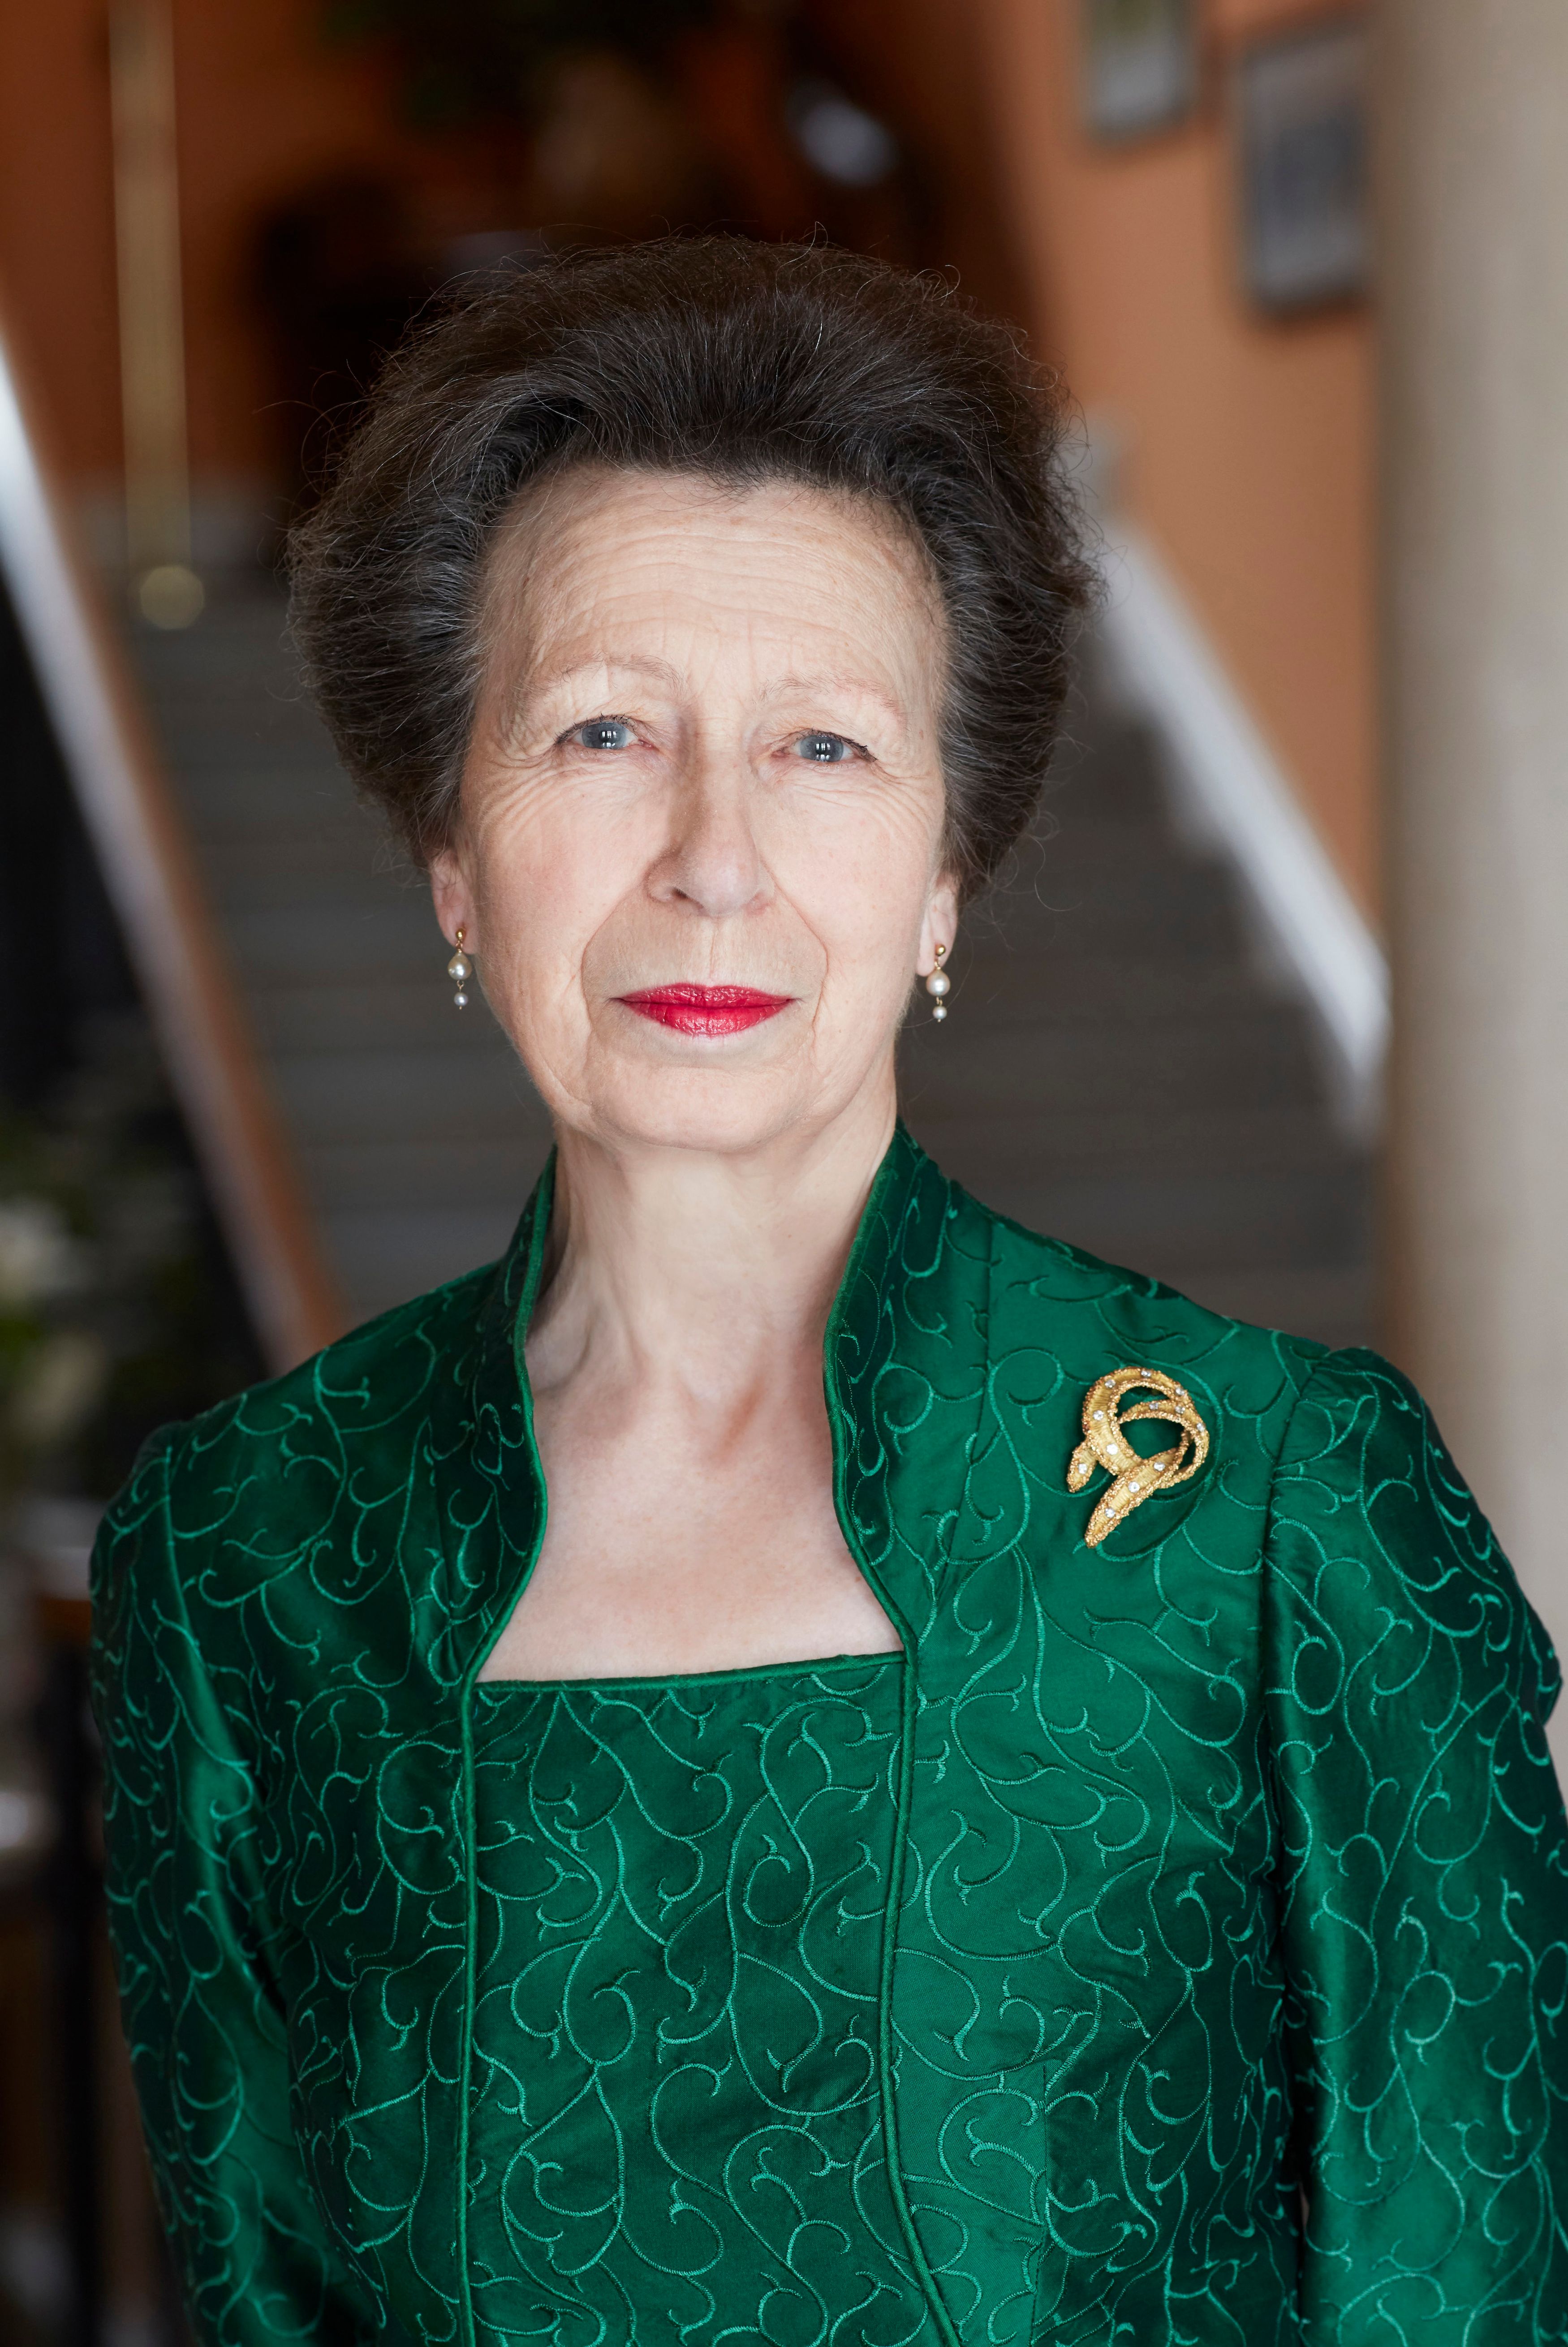 Princess Anne posing for a portrait at her home at Gatcombe Park in late February 2020. The photo was released to celebrate the Princess's 70th birthday | Photo: Getty Images